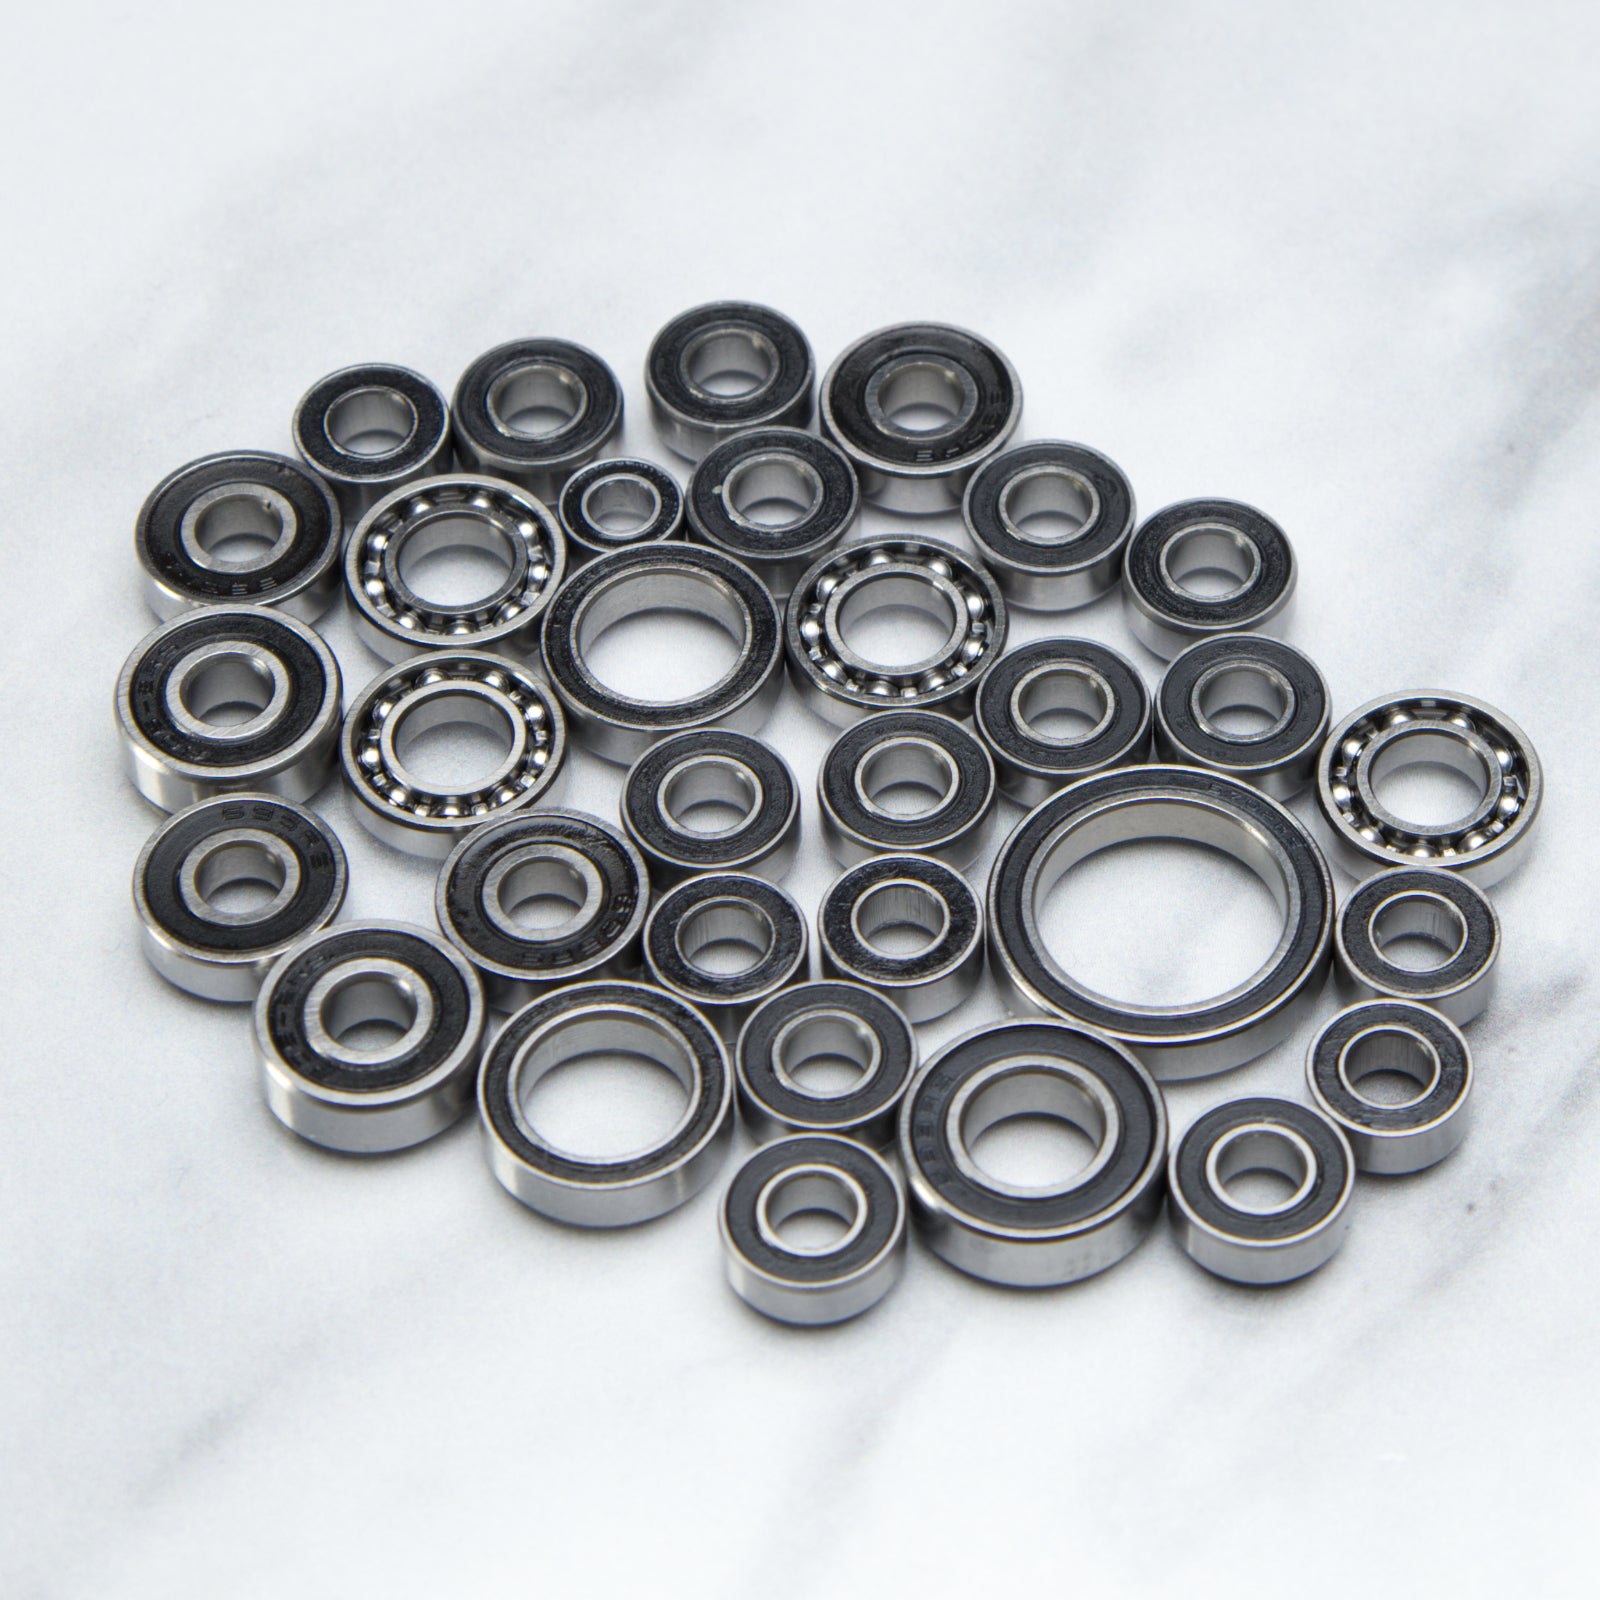 Axial Capra 1.9 Unlimited Trail Buggy (Kit/RTR) - Sealed Bearing Kit